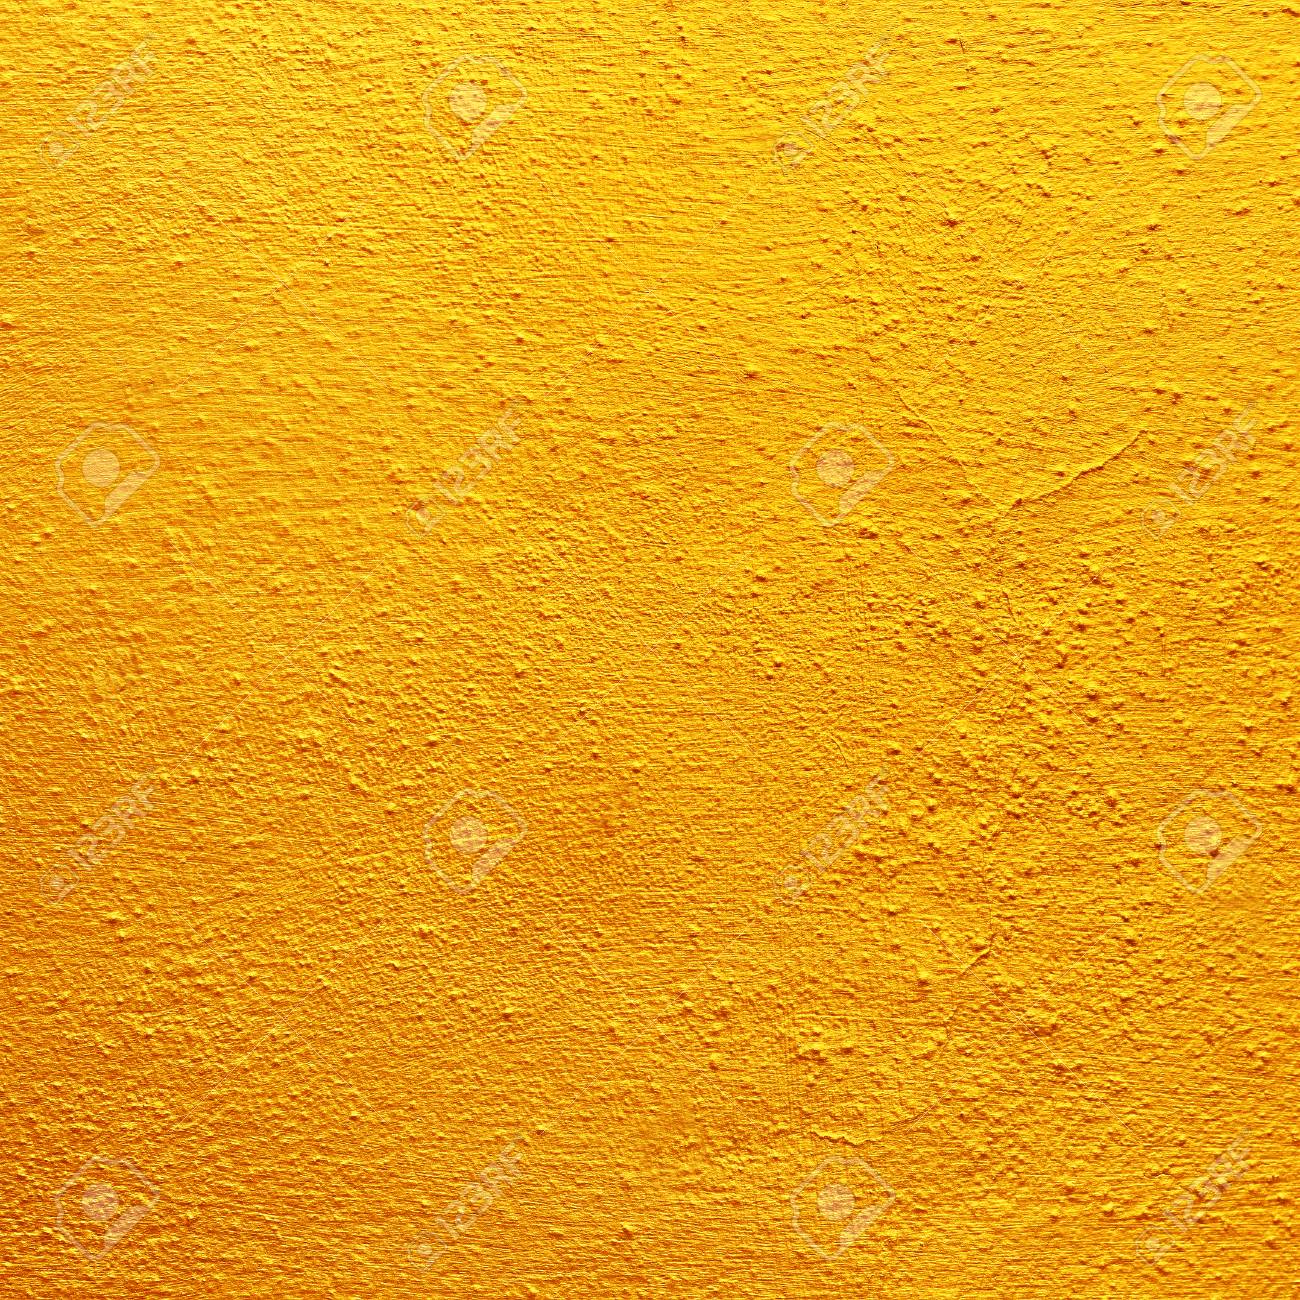 88285985-gold-or-yellow-paint-on-rough-cement-wall-texture.jpg